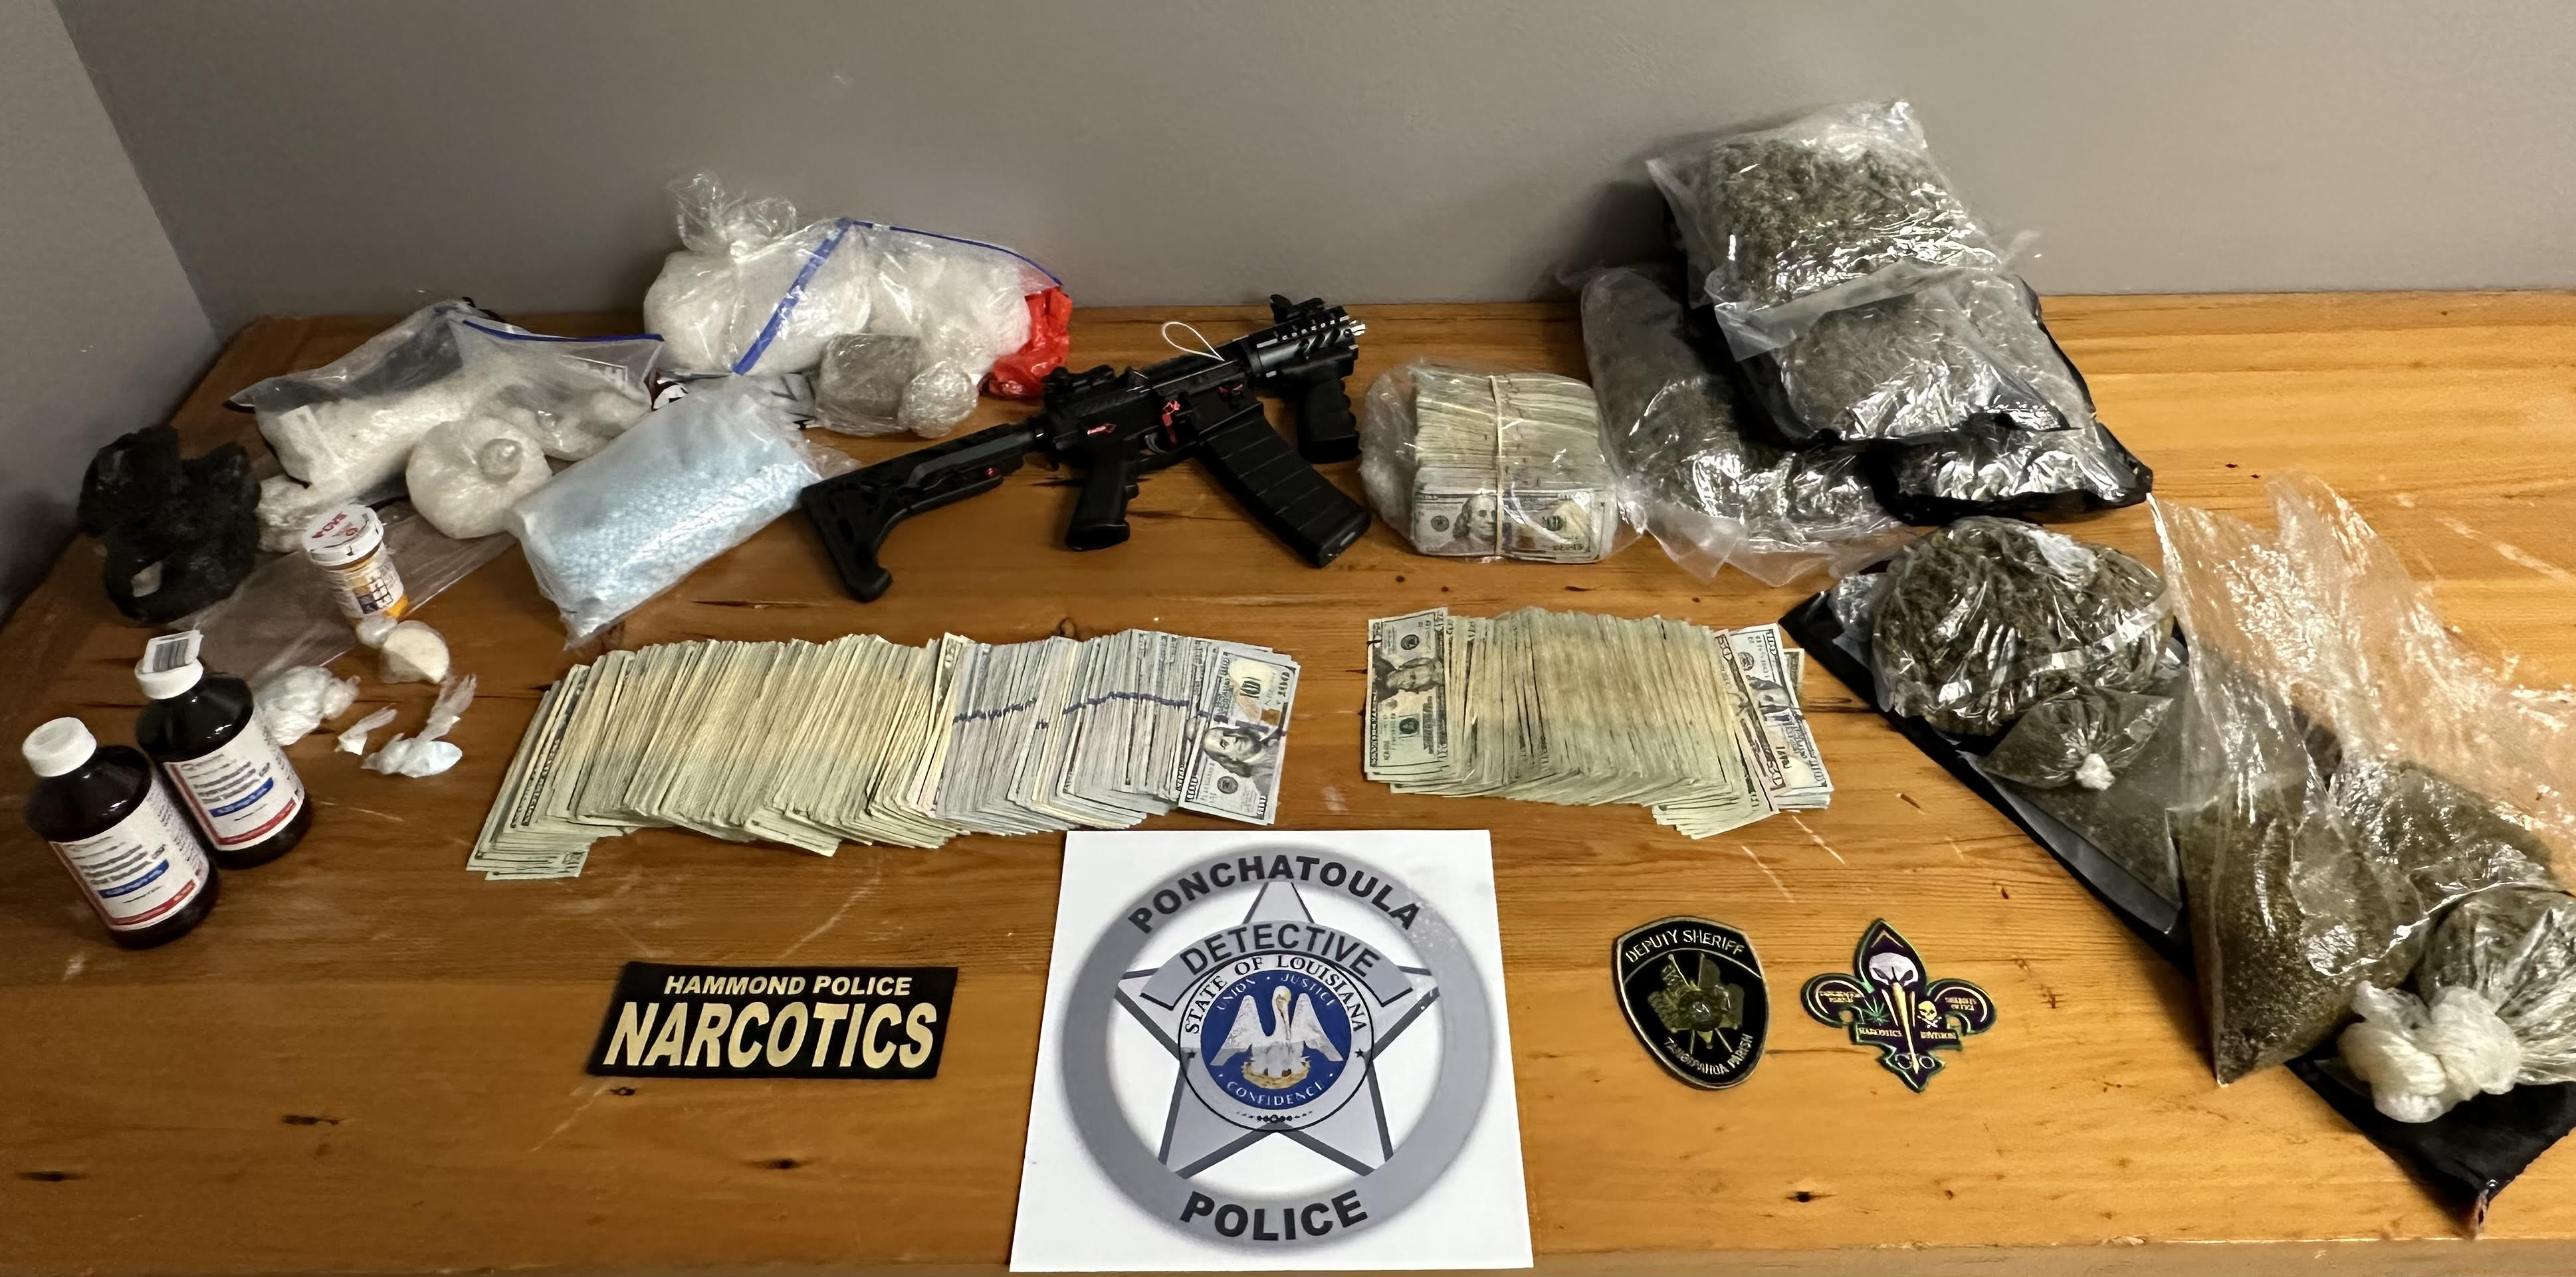 Ponchatoula police conduct largest drug bust in city's history, chief says